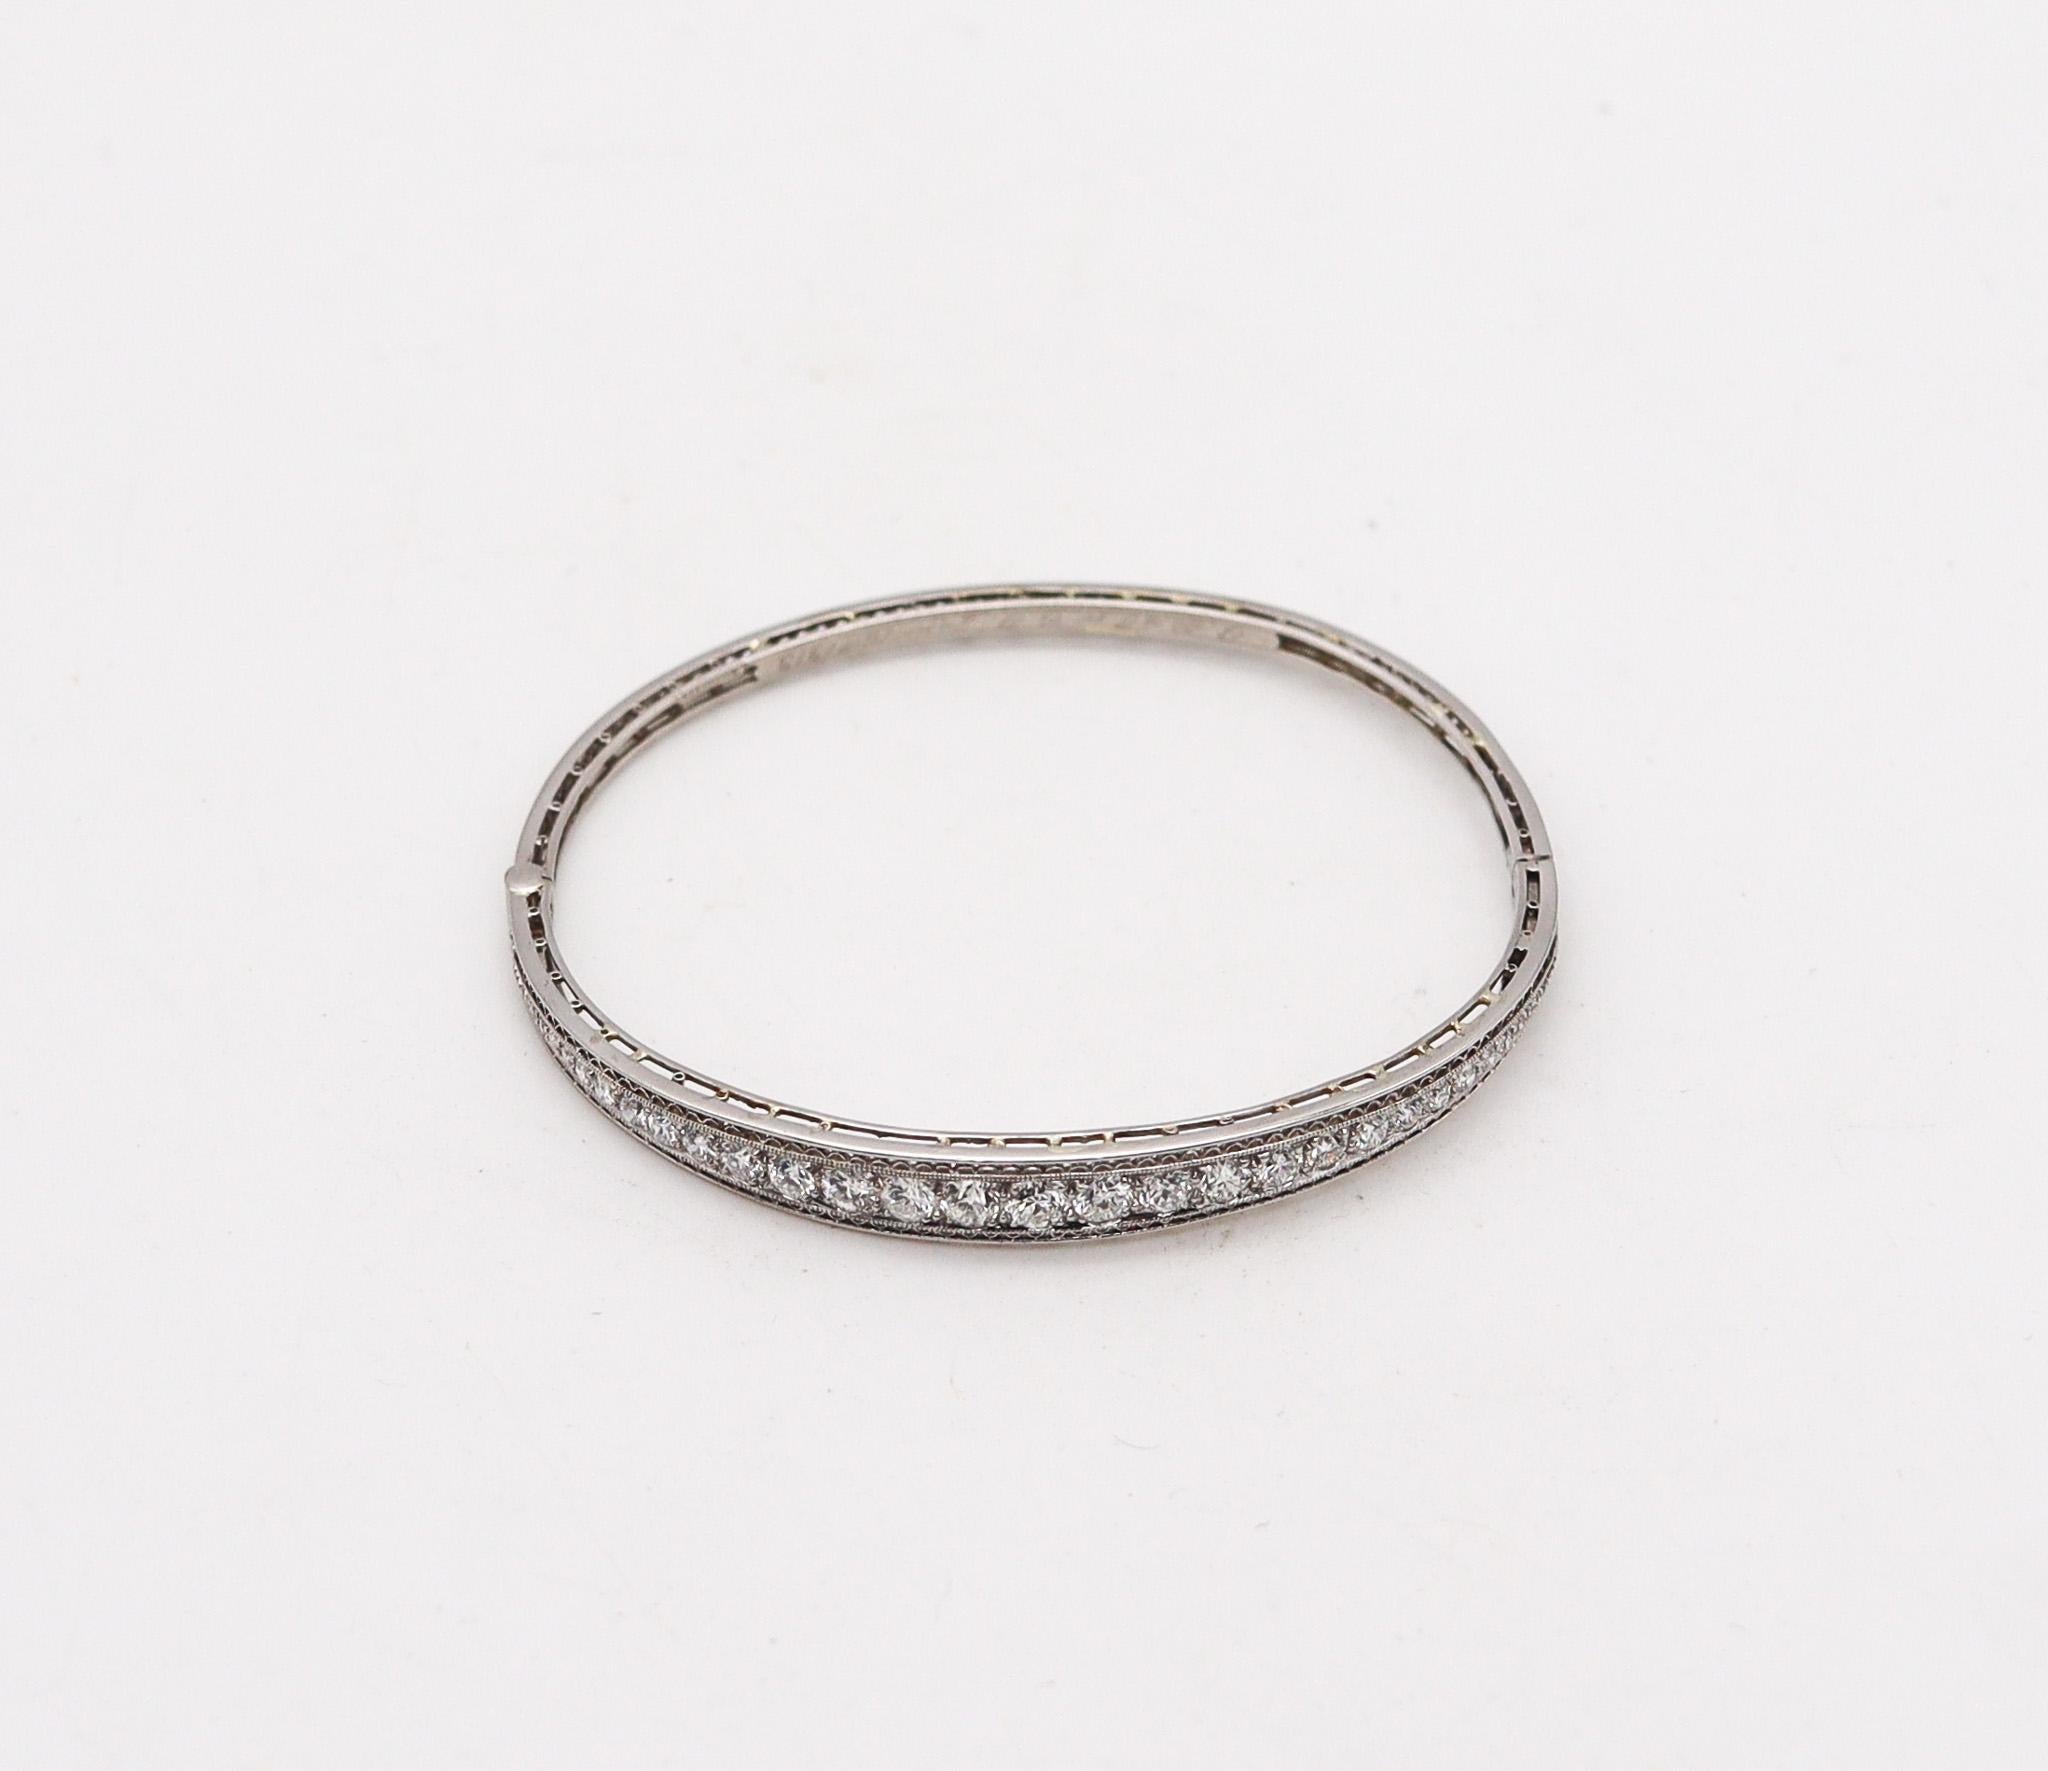 Marcus & Co. 1910 Edwardian Bangle Bracelet In Platinum With 3.16 Ctw In Diamond In Excellent Condition For Sale In Miami, FL